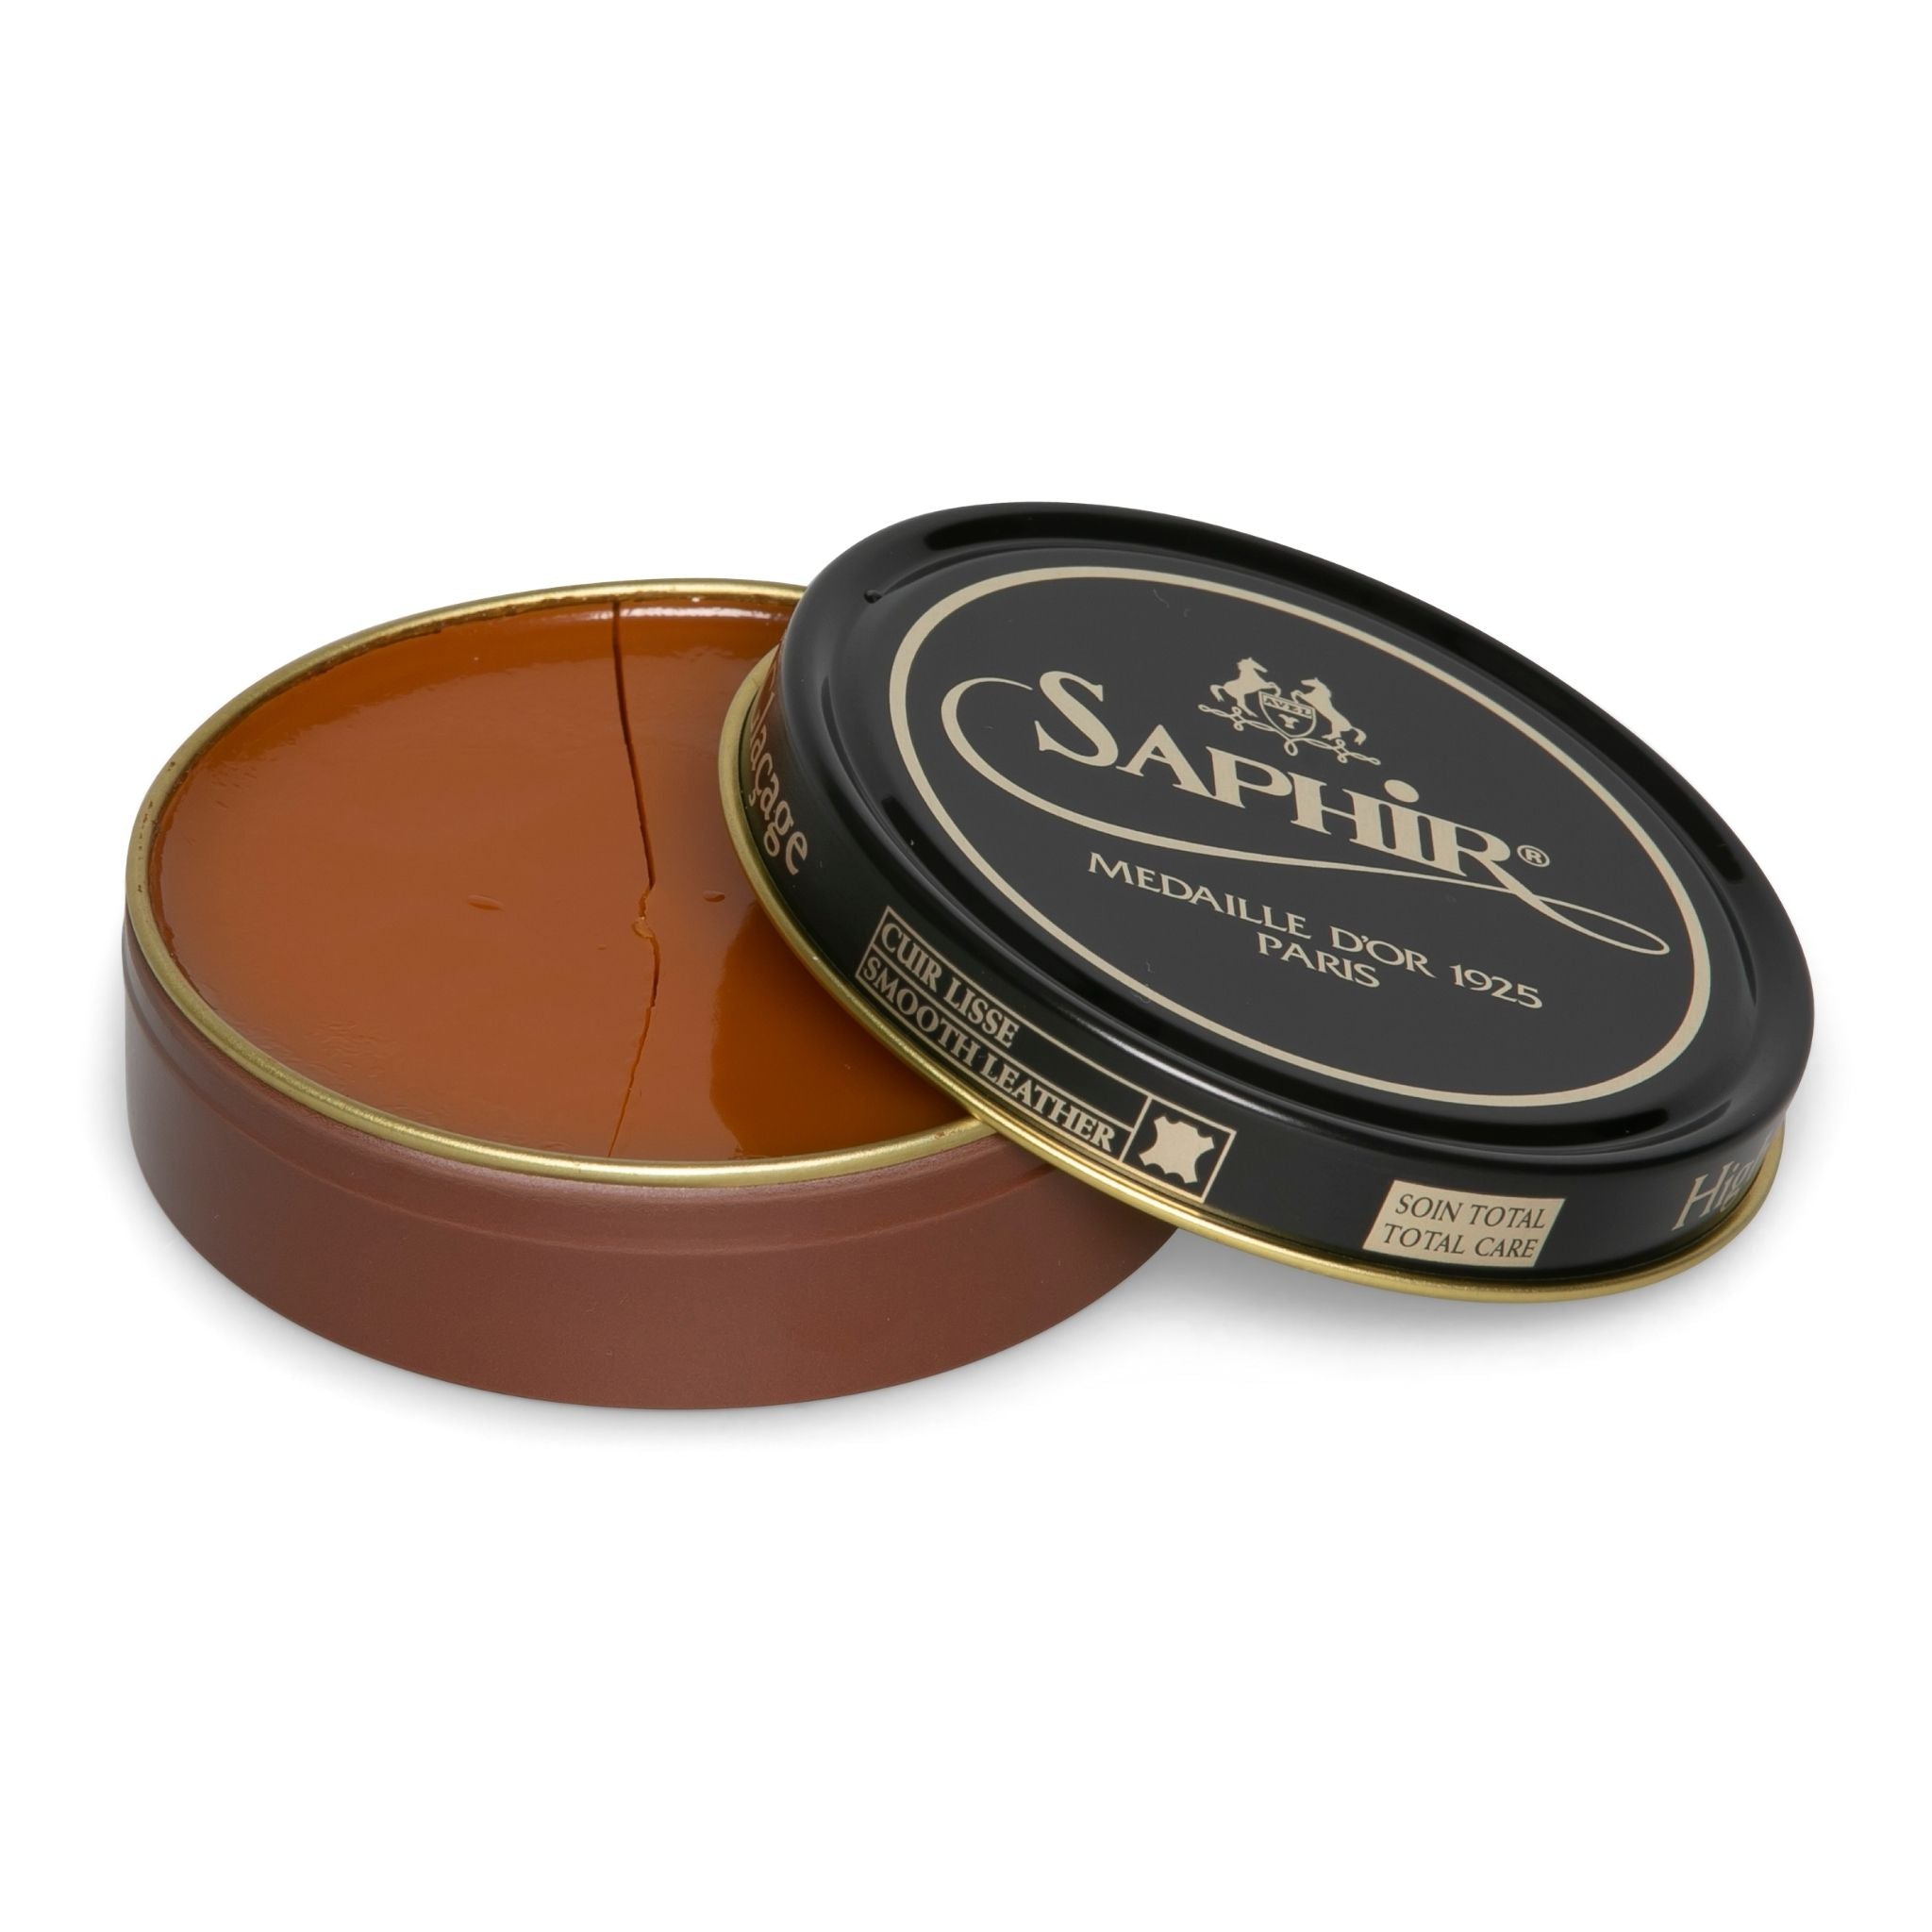 Saphir Pate de Luxe Wax Shoe Polish (100ml) in light brown colour is the perfect solution to achieve the ultimate shine